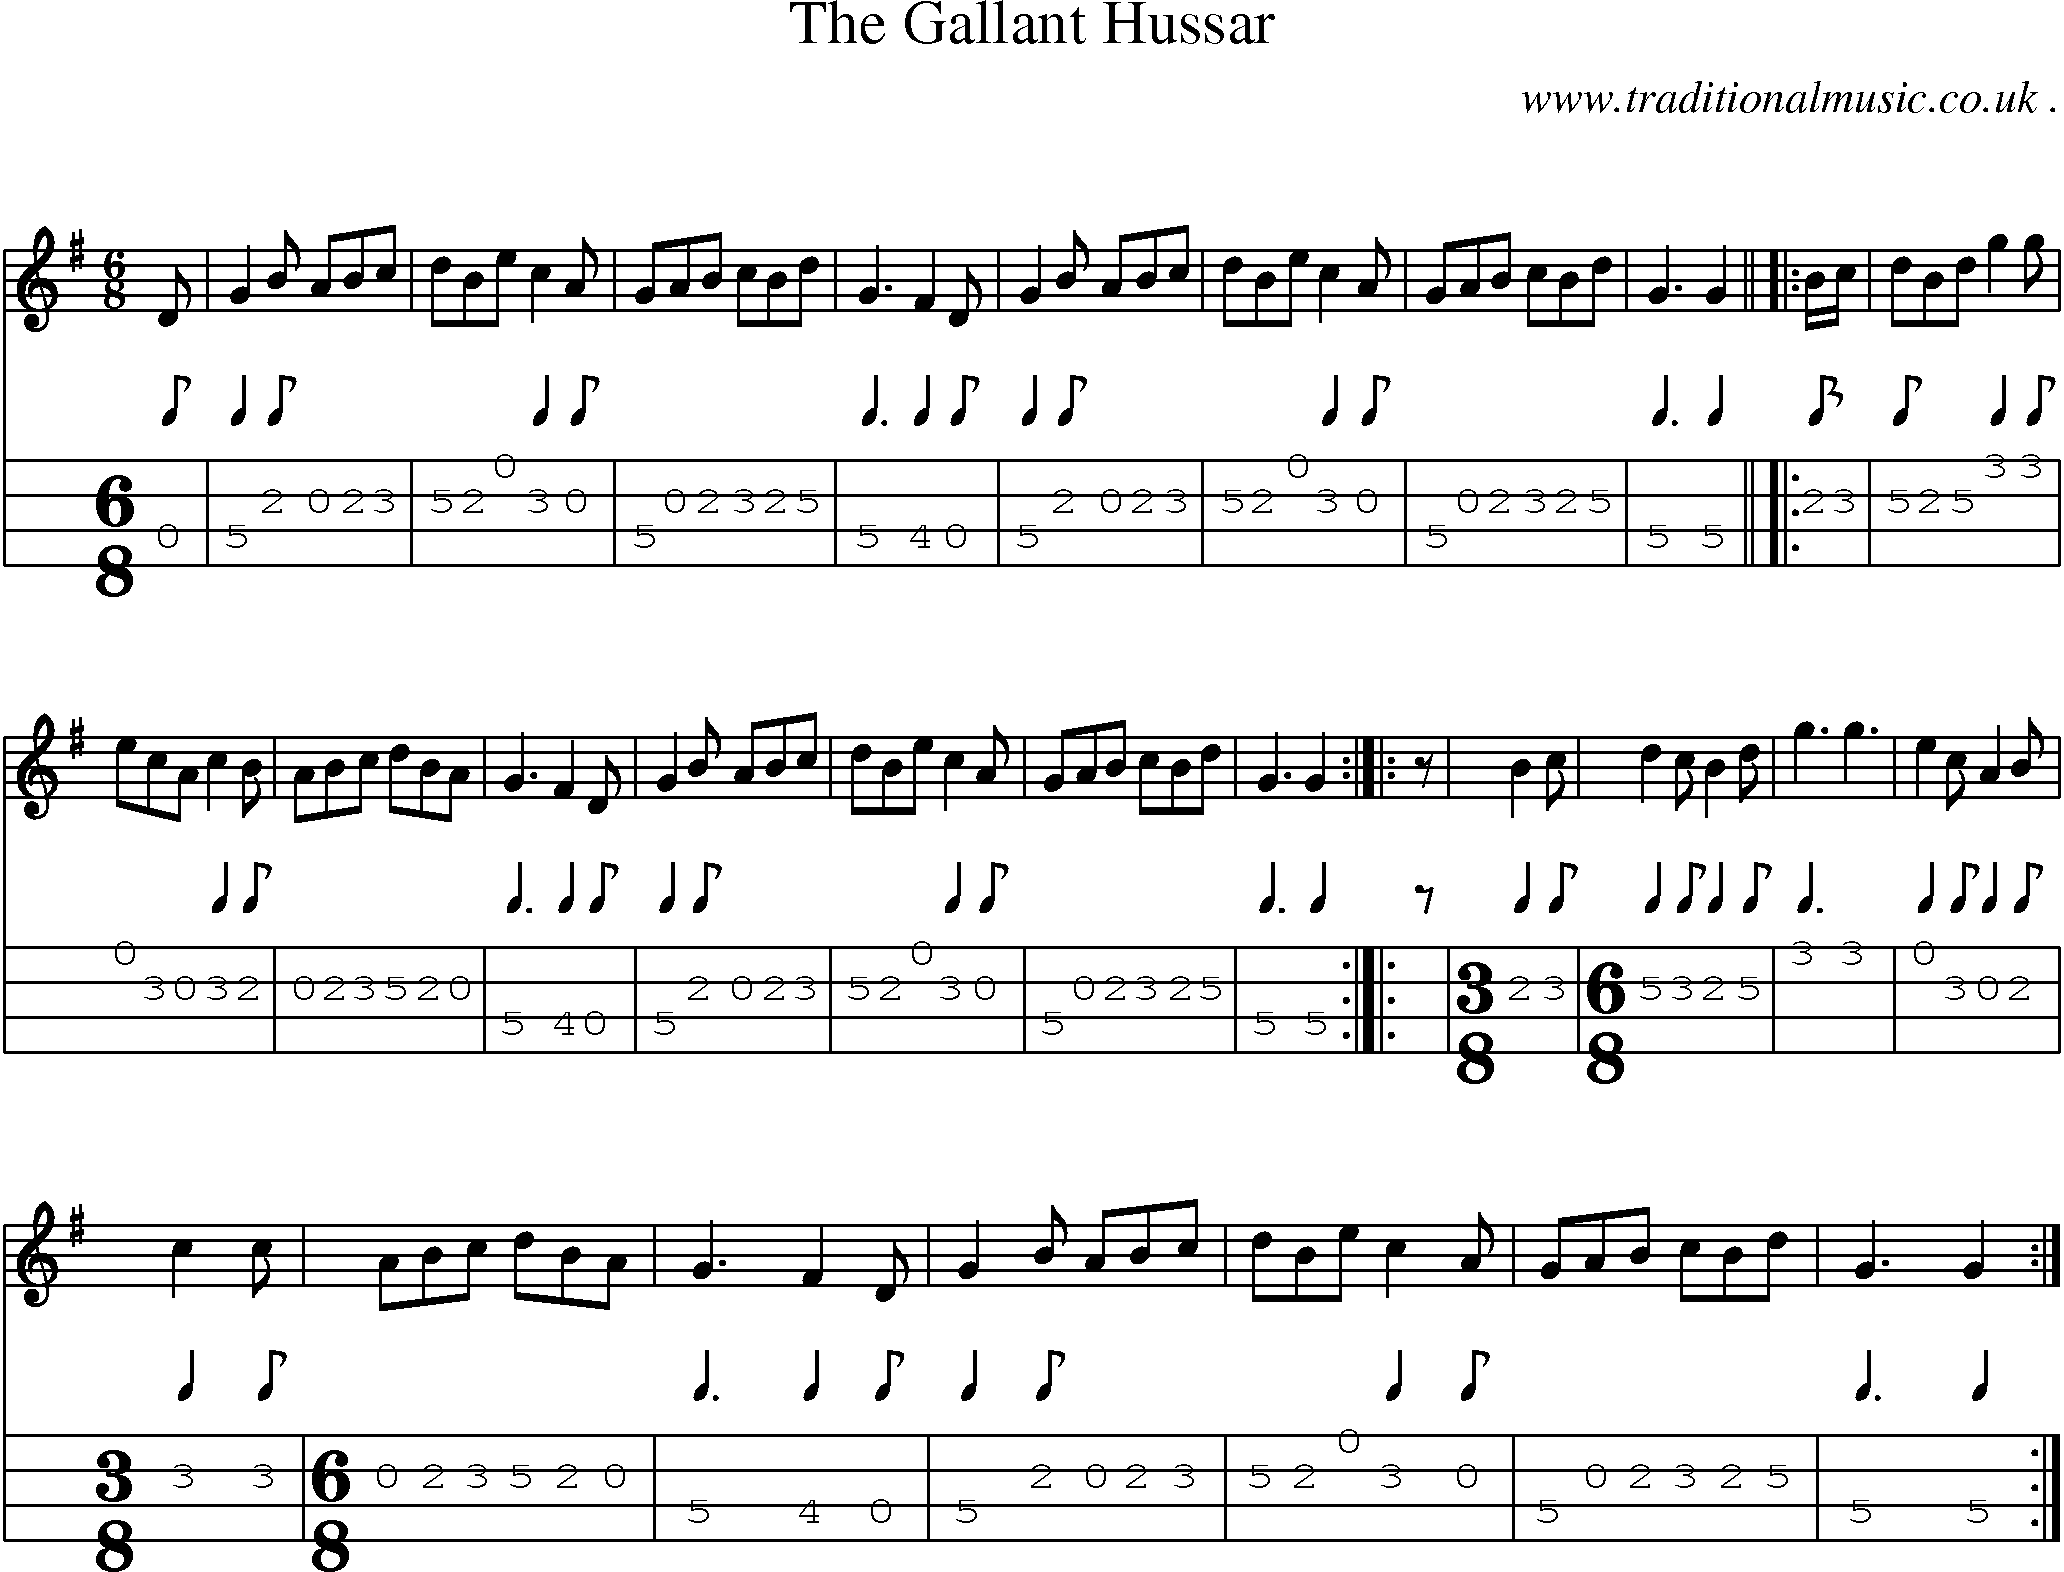 Sheet-Music and Mandolin Tabs for The Gallant Hussar